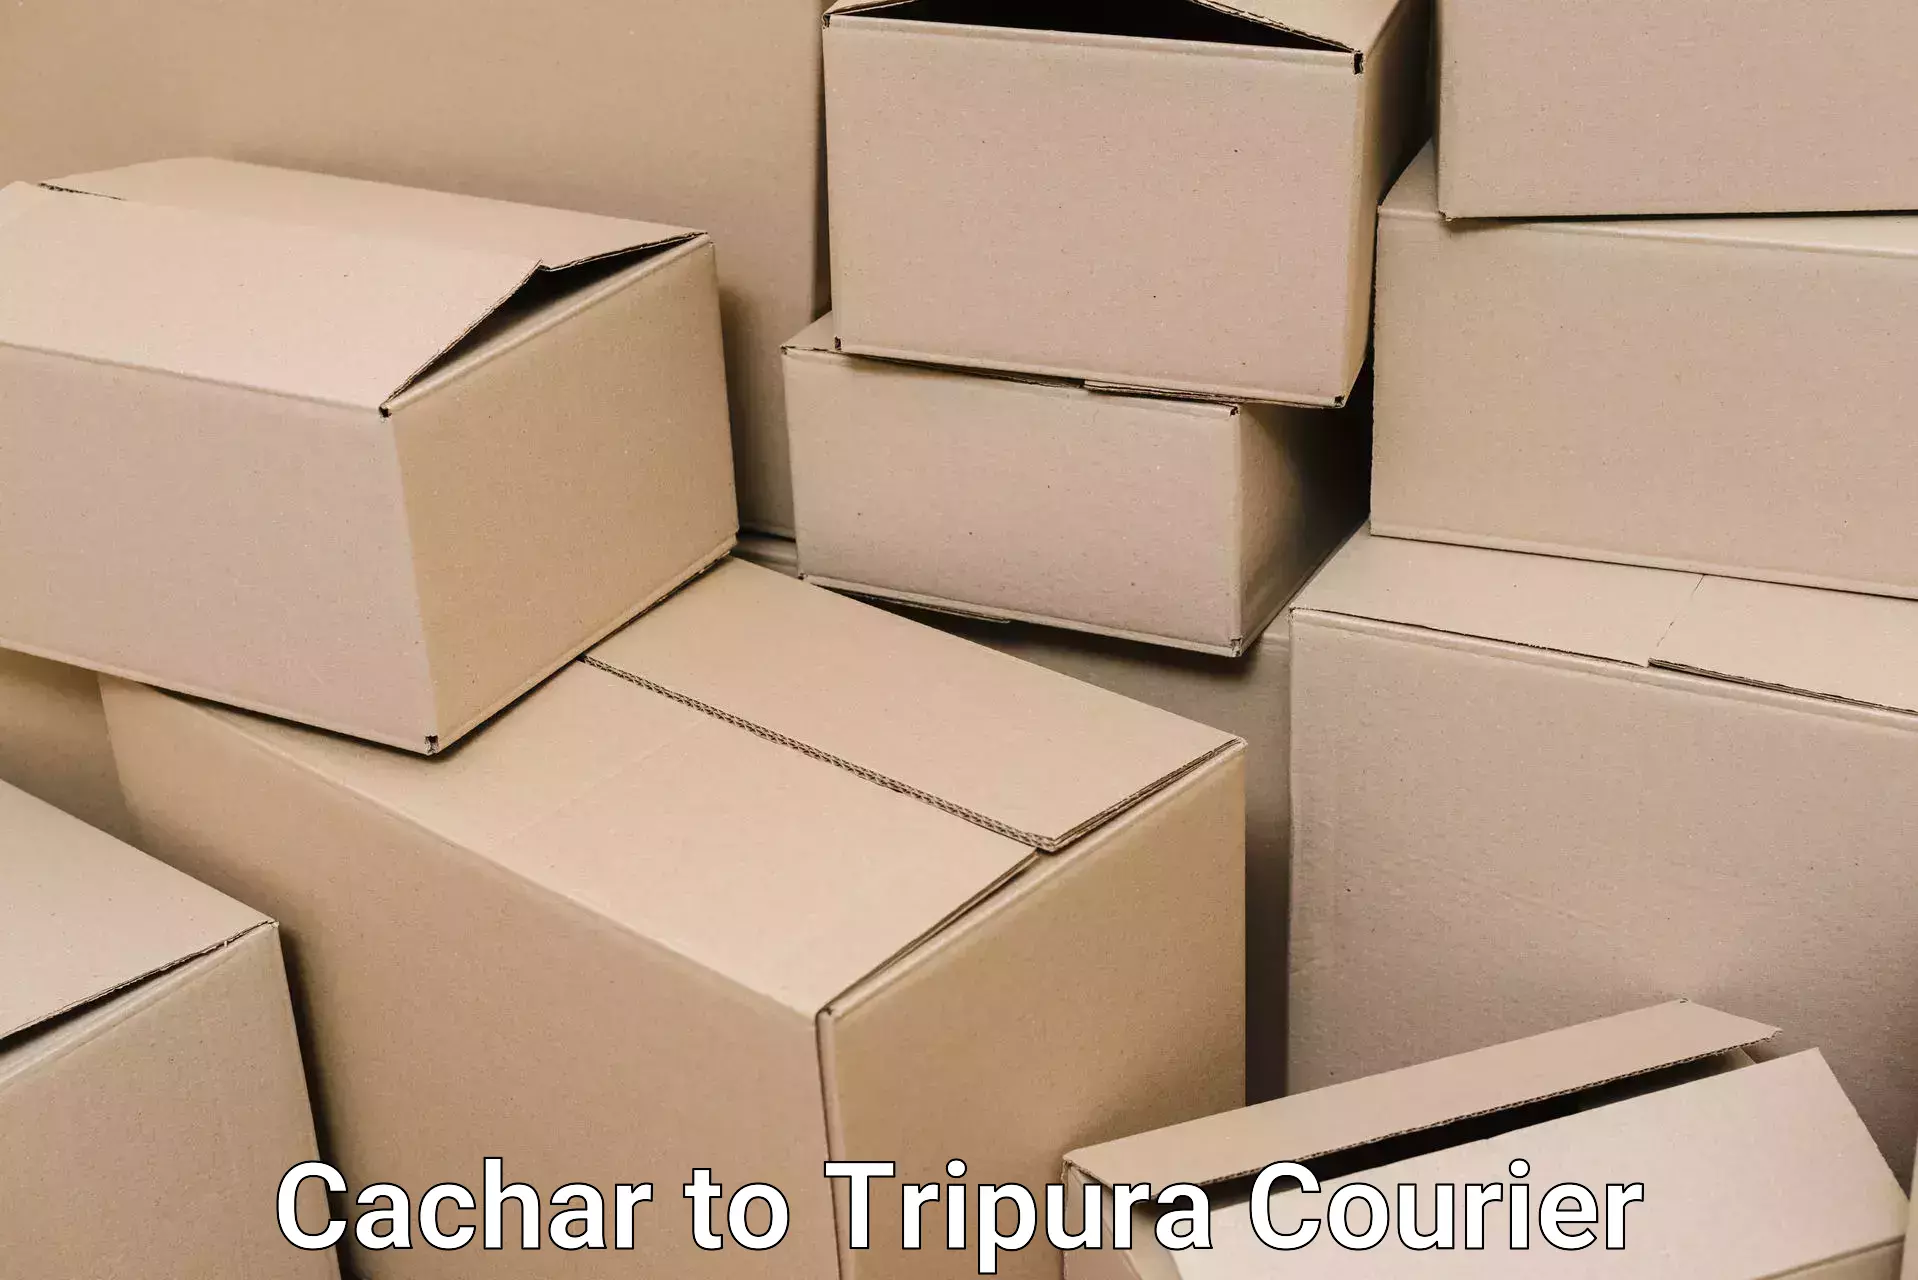 Quality furniture relocation in Cachar to Agartala